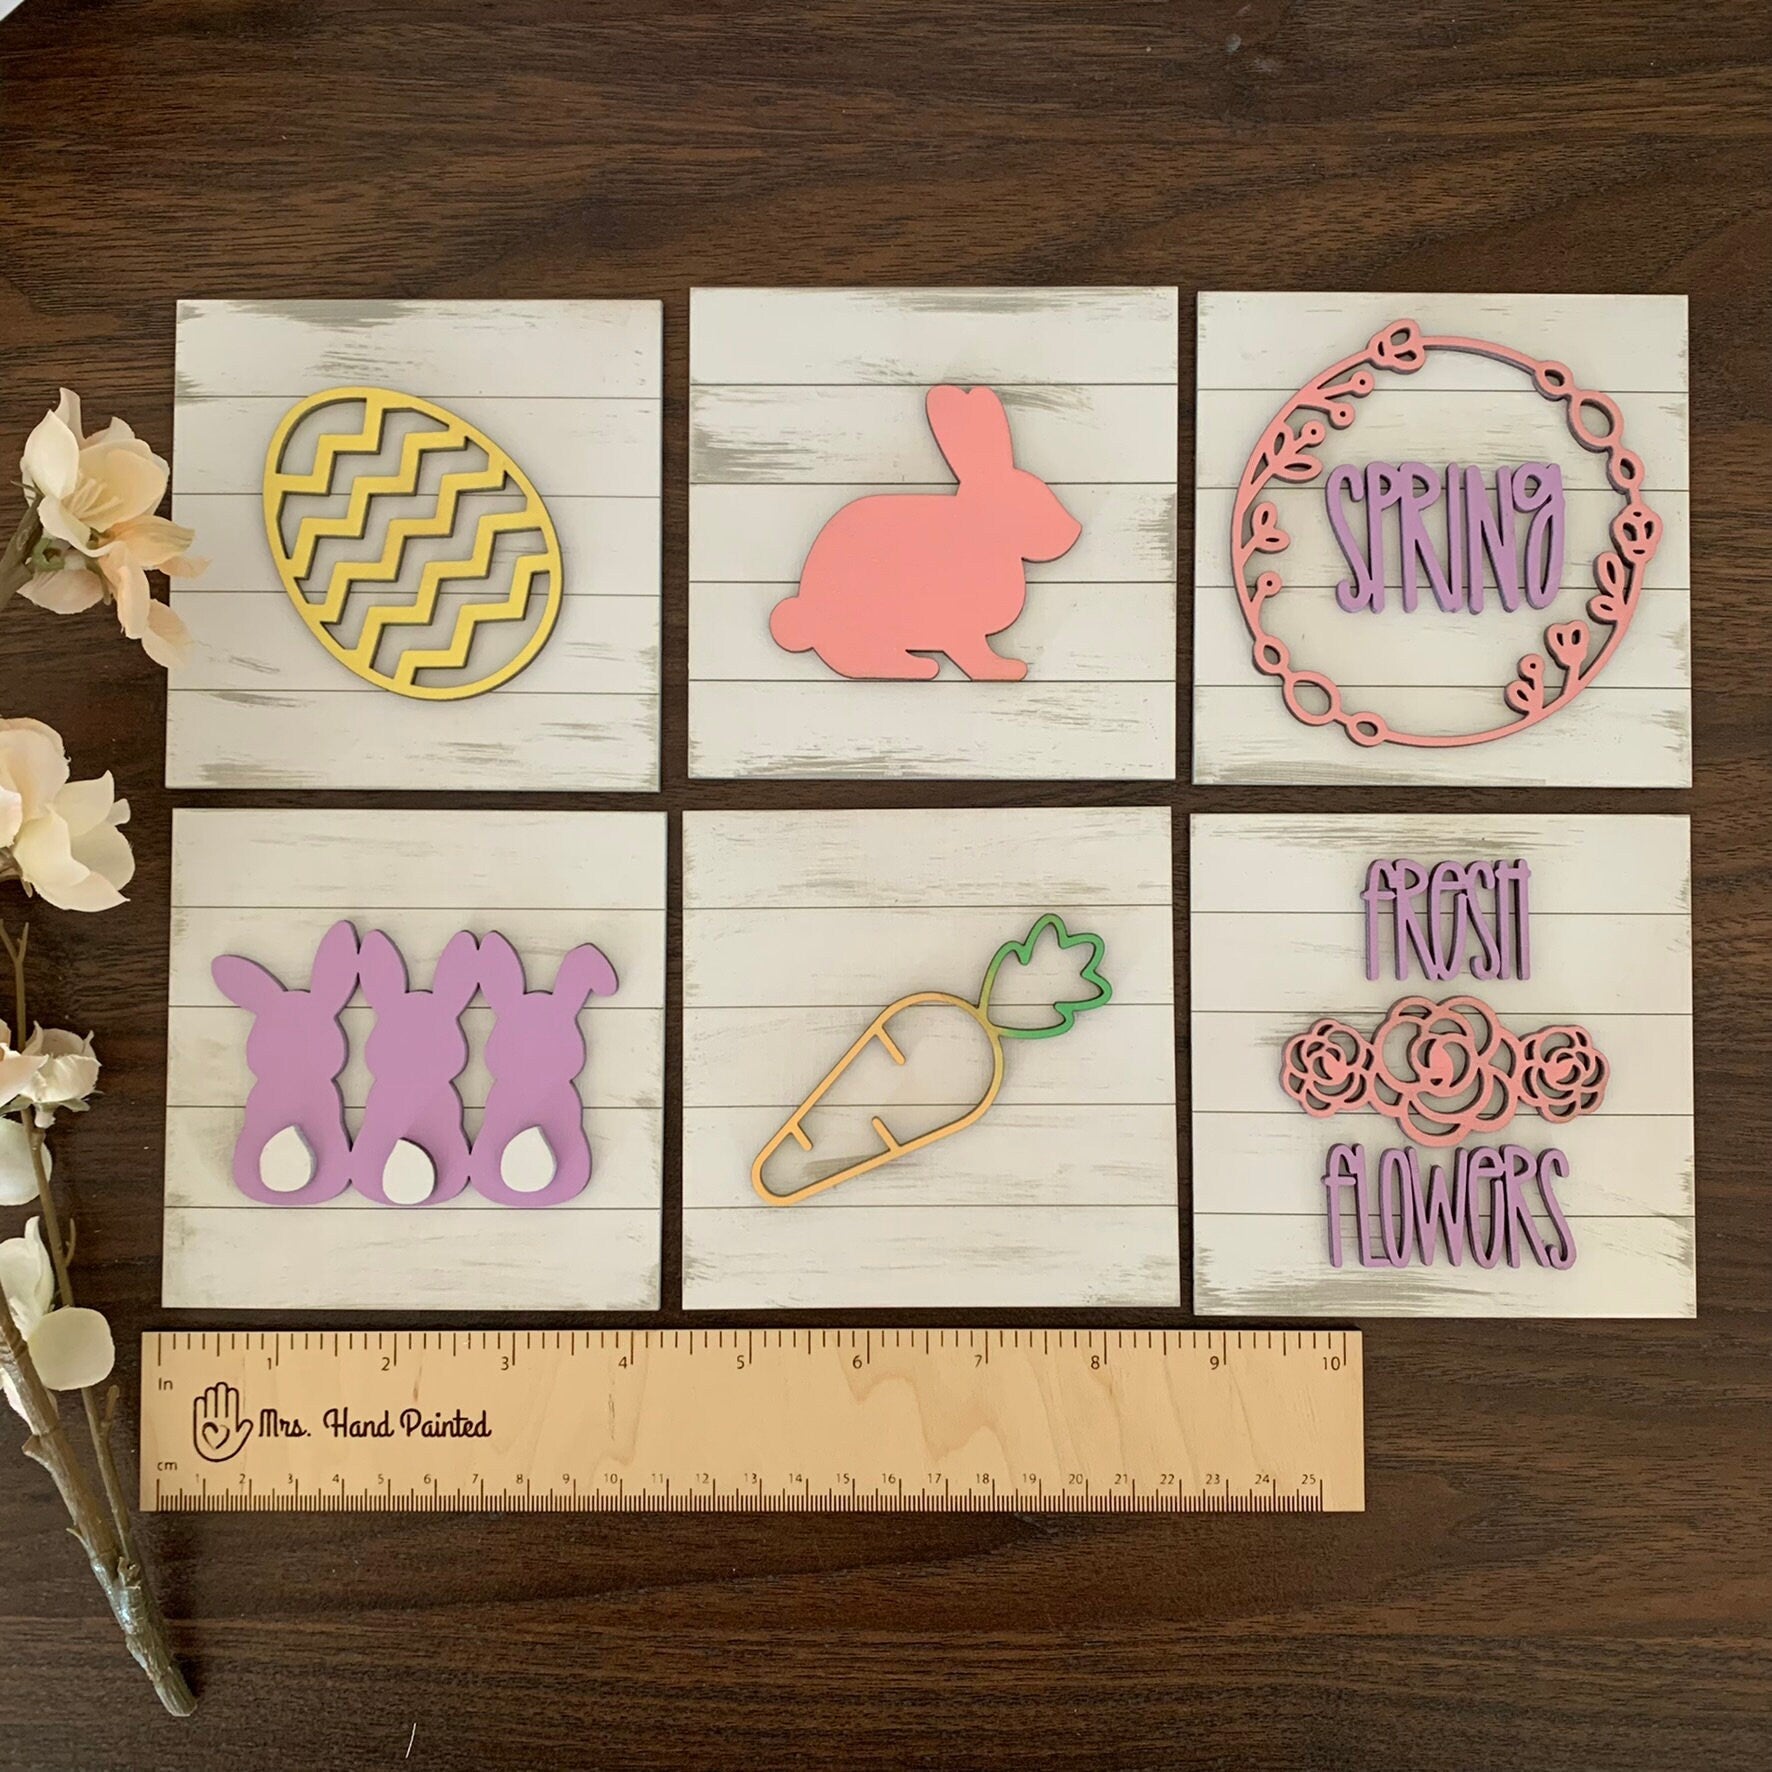 Easter and Spring Interchangeable Signs - Laser Cut Wood Painted